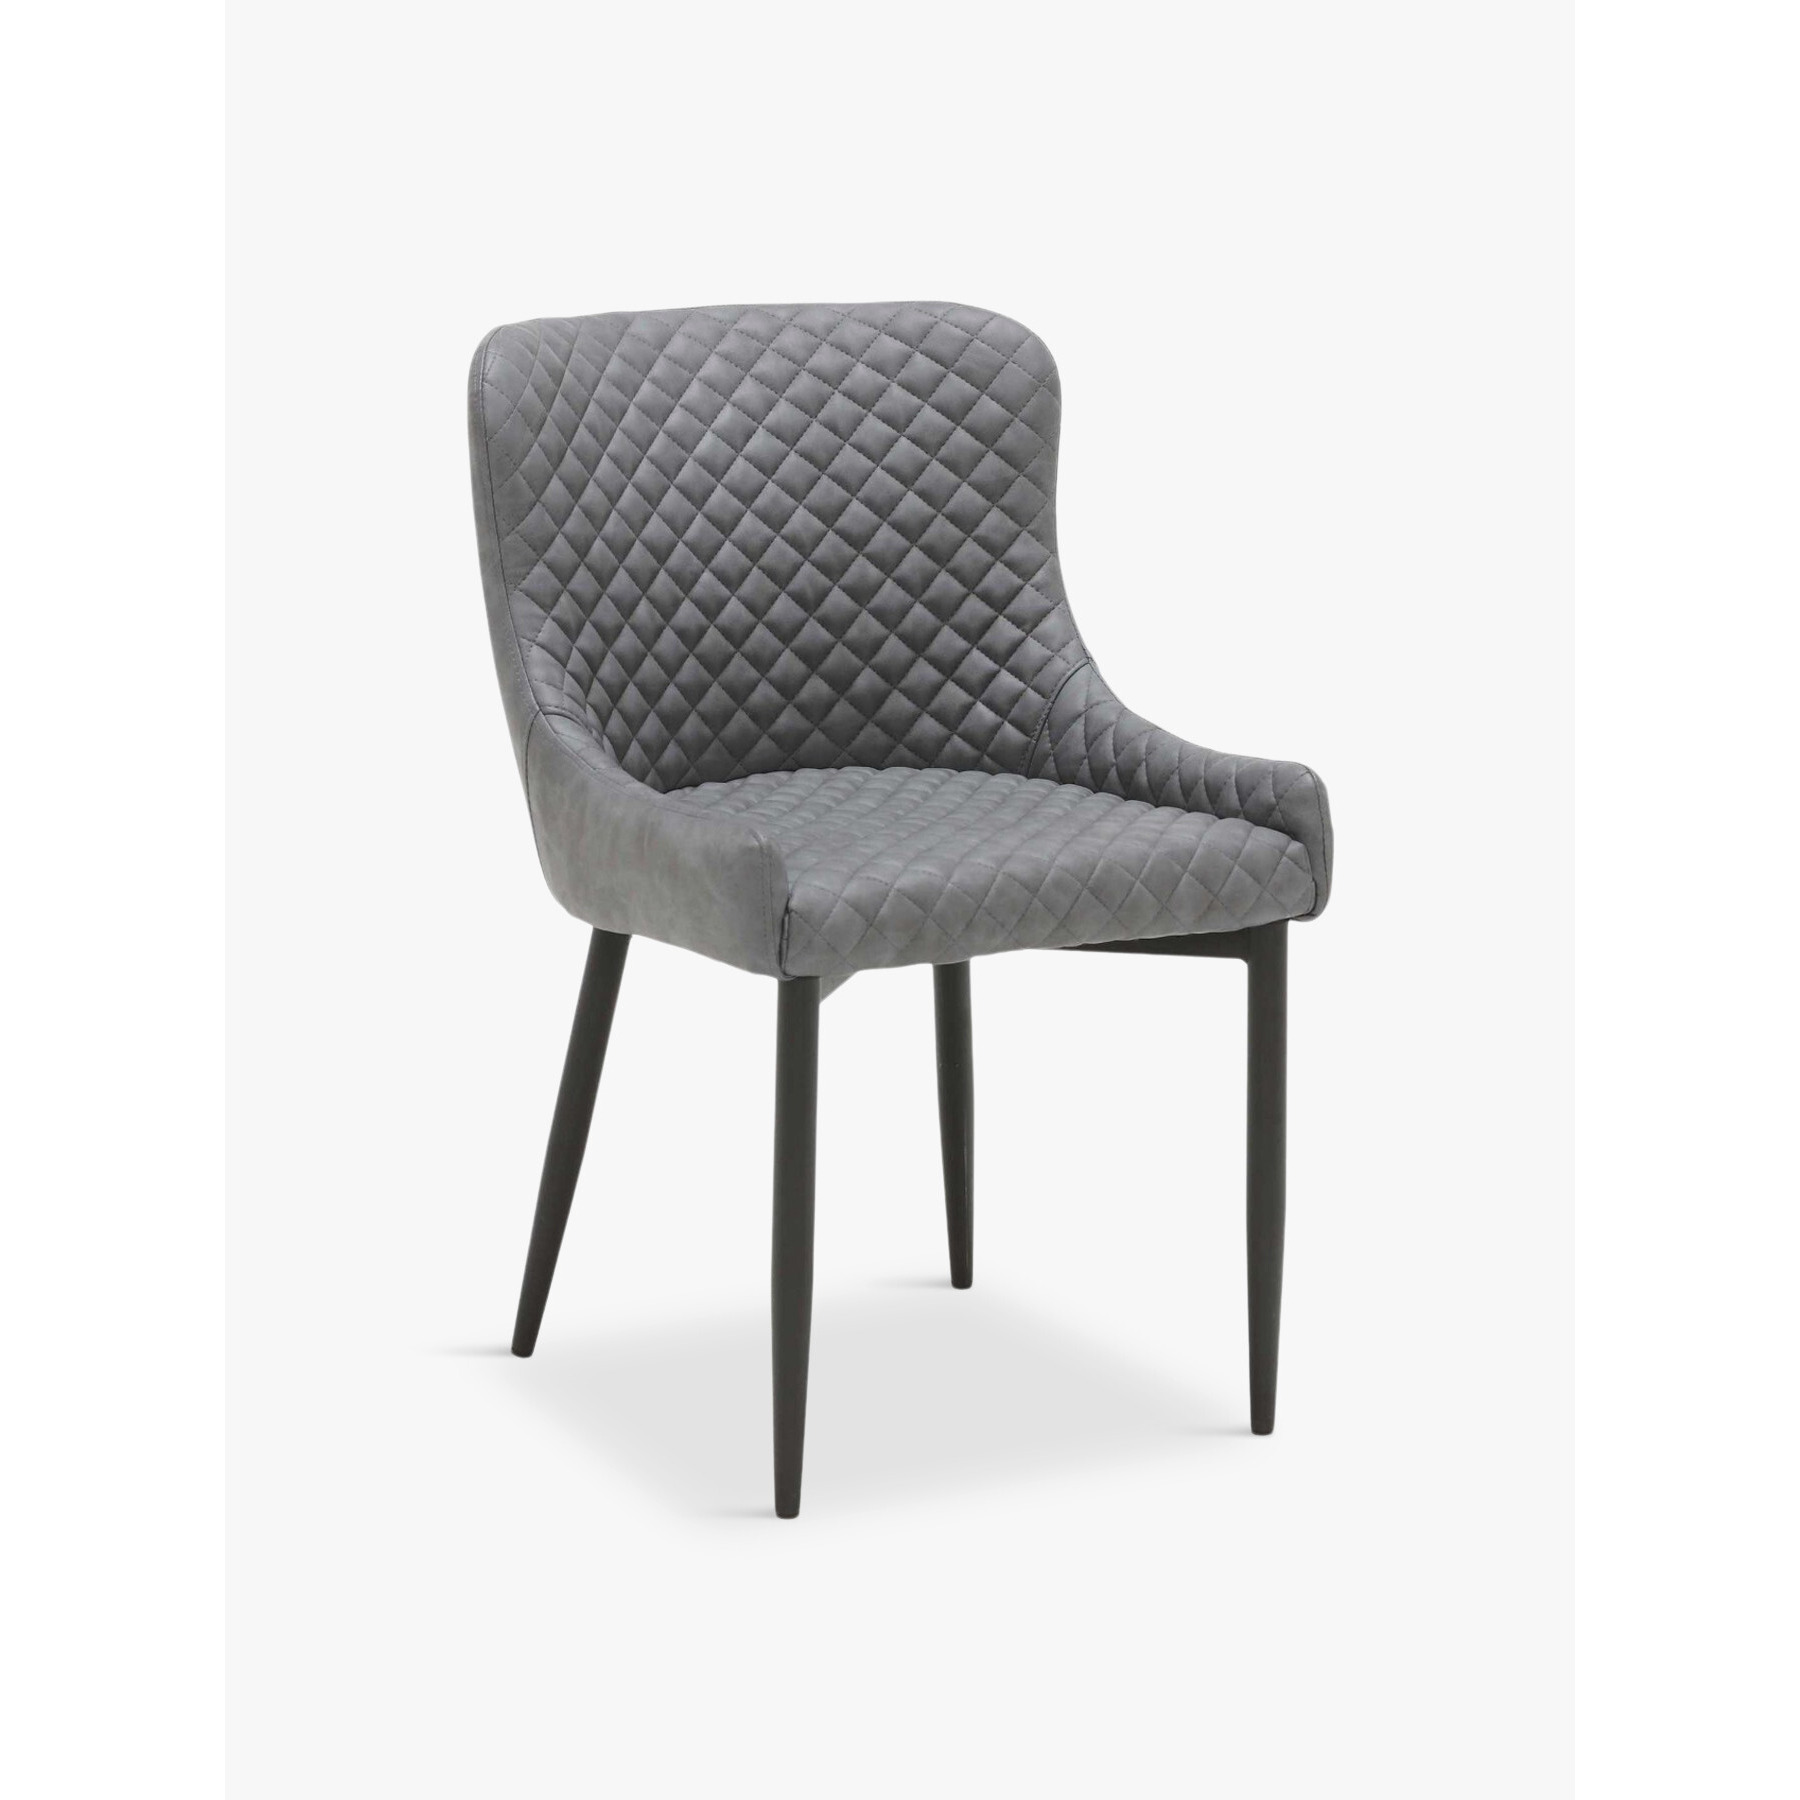 Barker and Stonehouse Rivington Upholstered Dining Armchair Grey - image 1